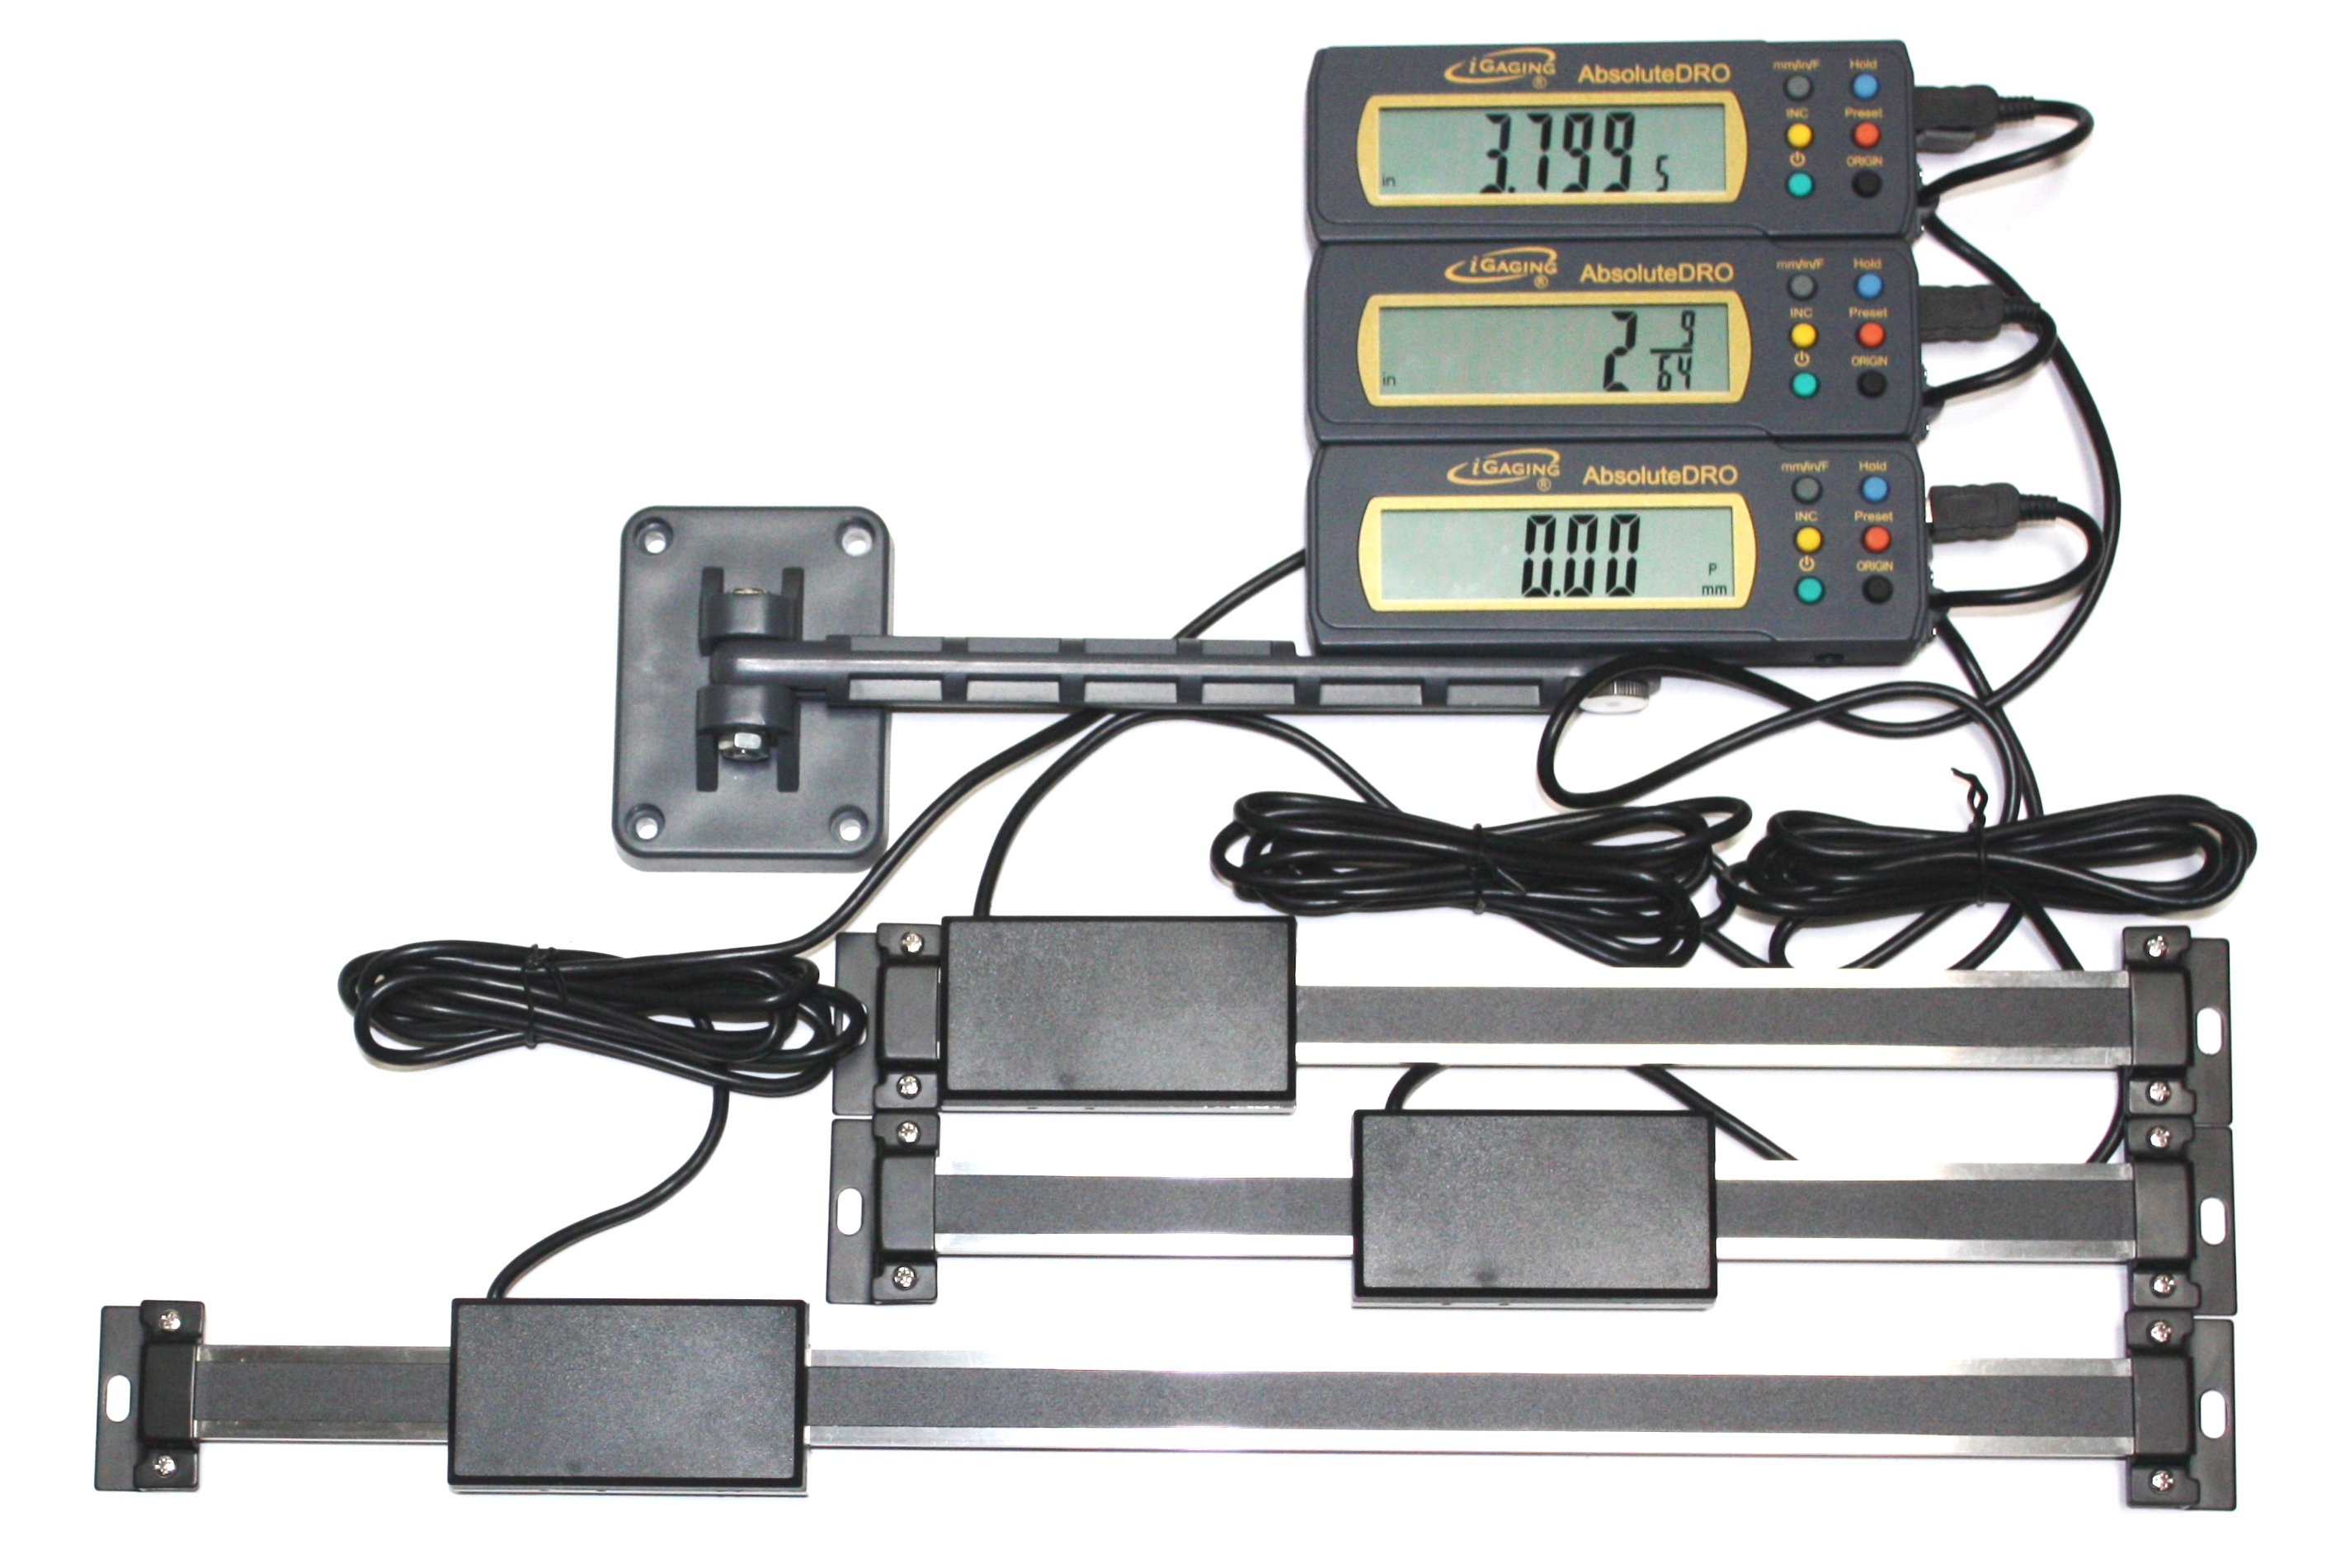 Absolute DRO Digital Readout 12"/300mm Read Out Stainless Steel Beam